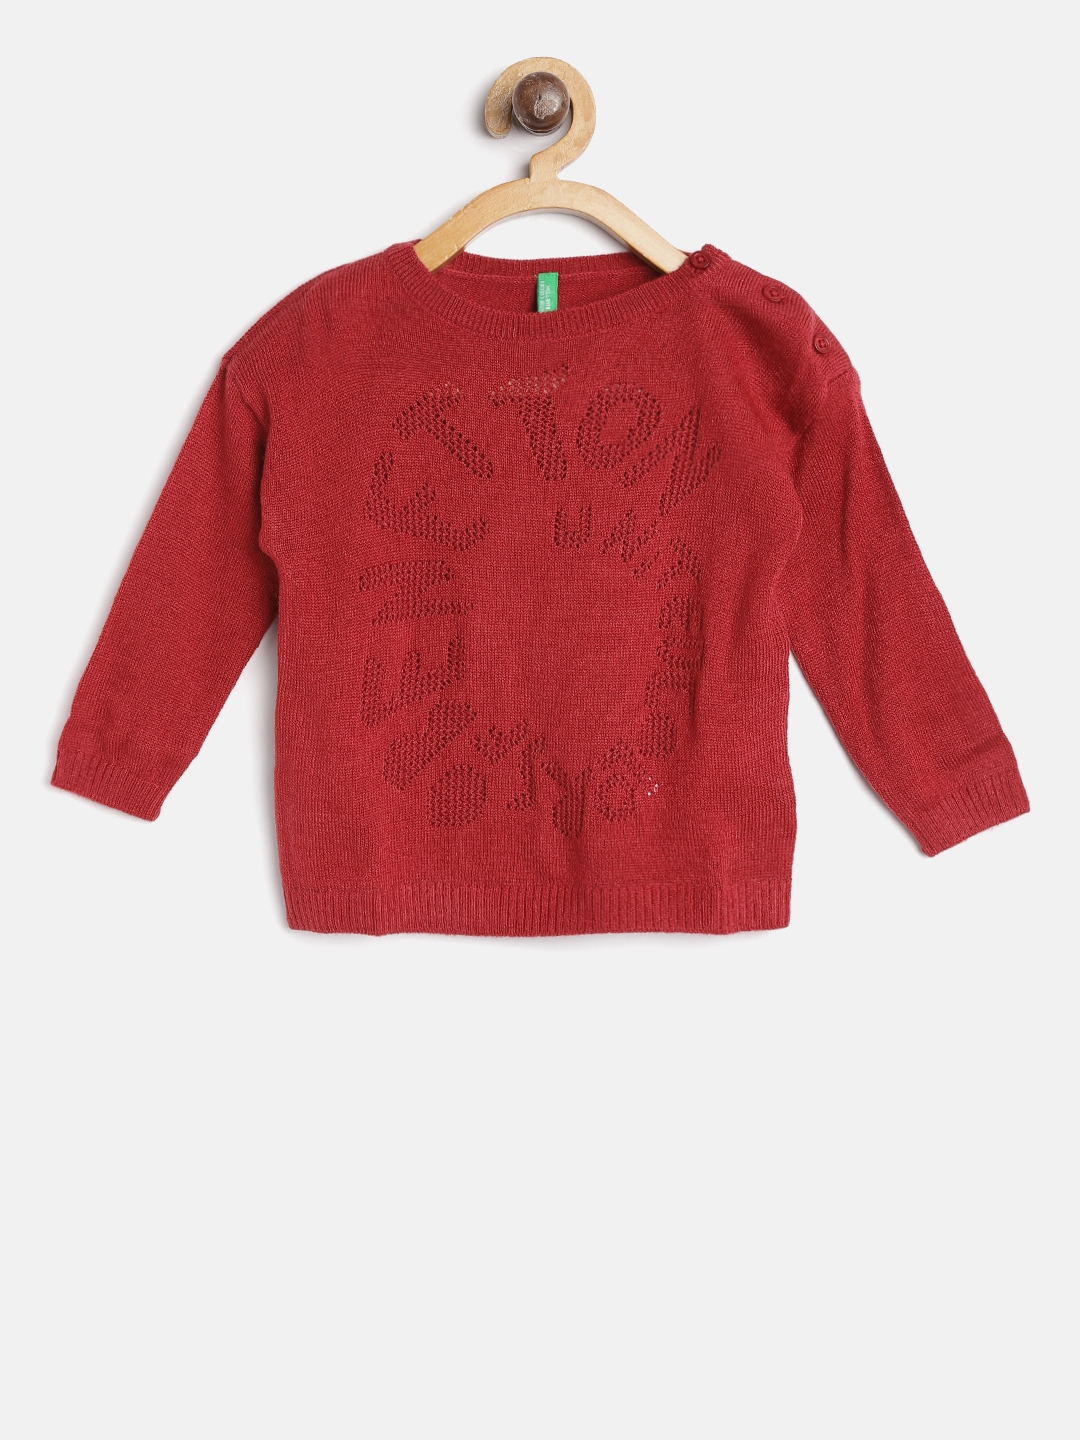 Buy United Colors Of Benetton Girls Maroon Self Design Pullover ...